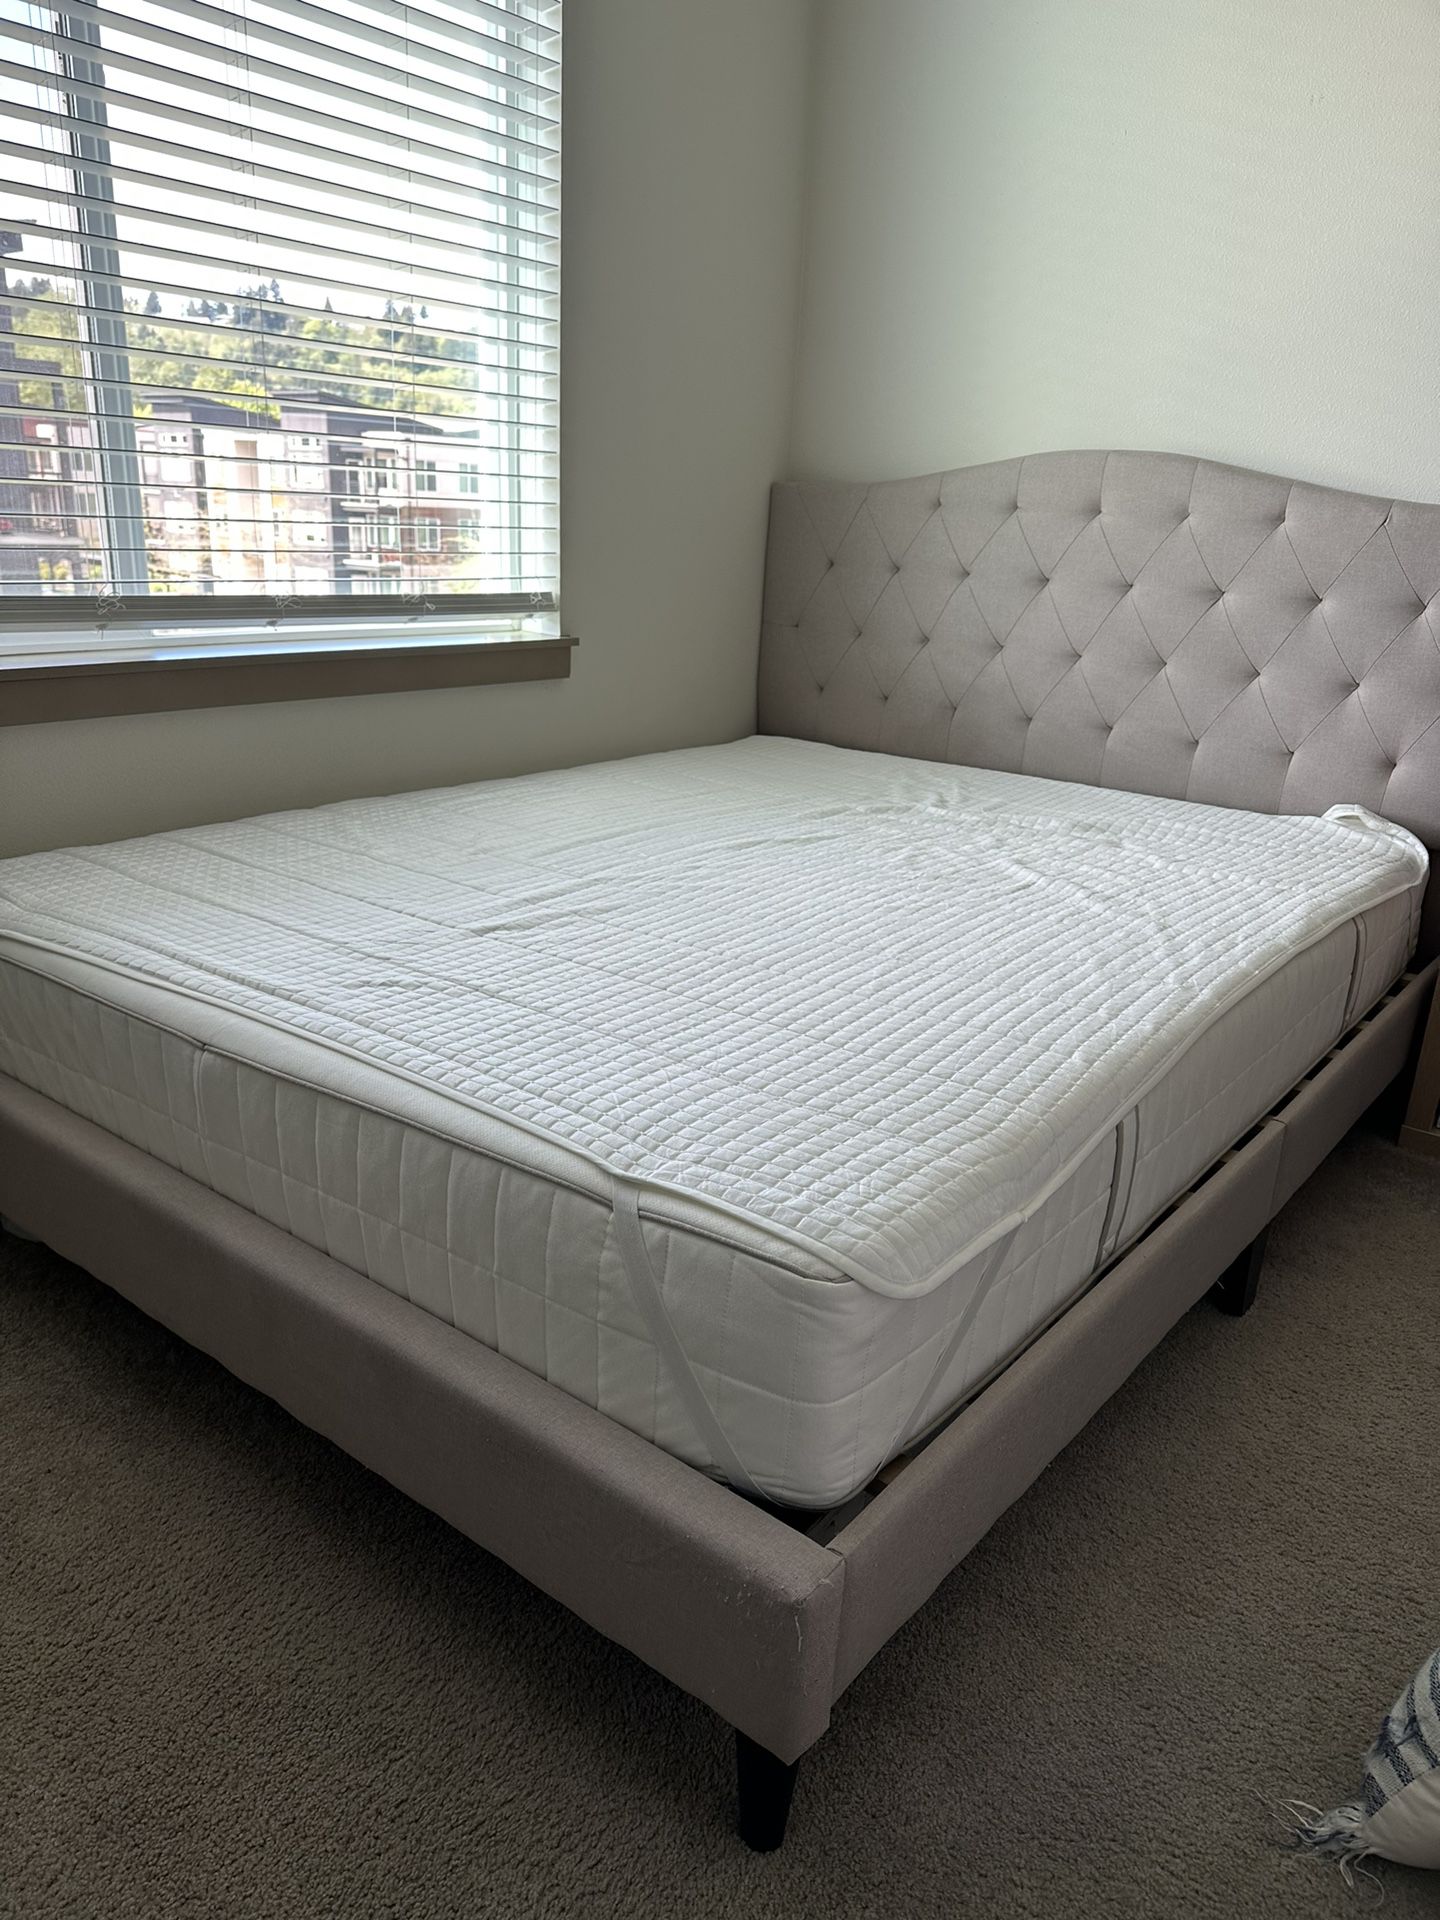 Bed Frame And Queen Size Mattress